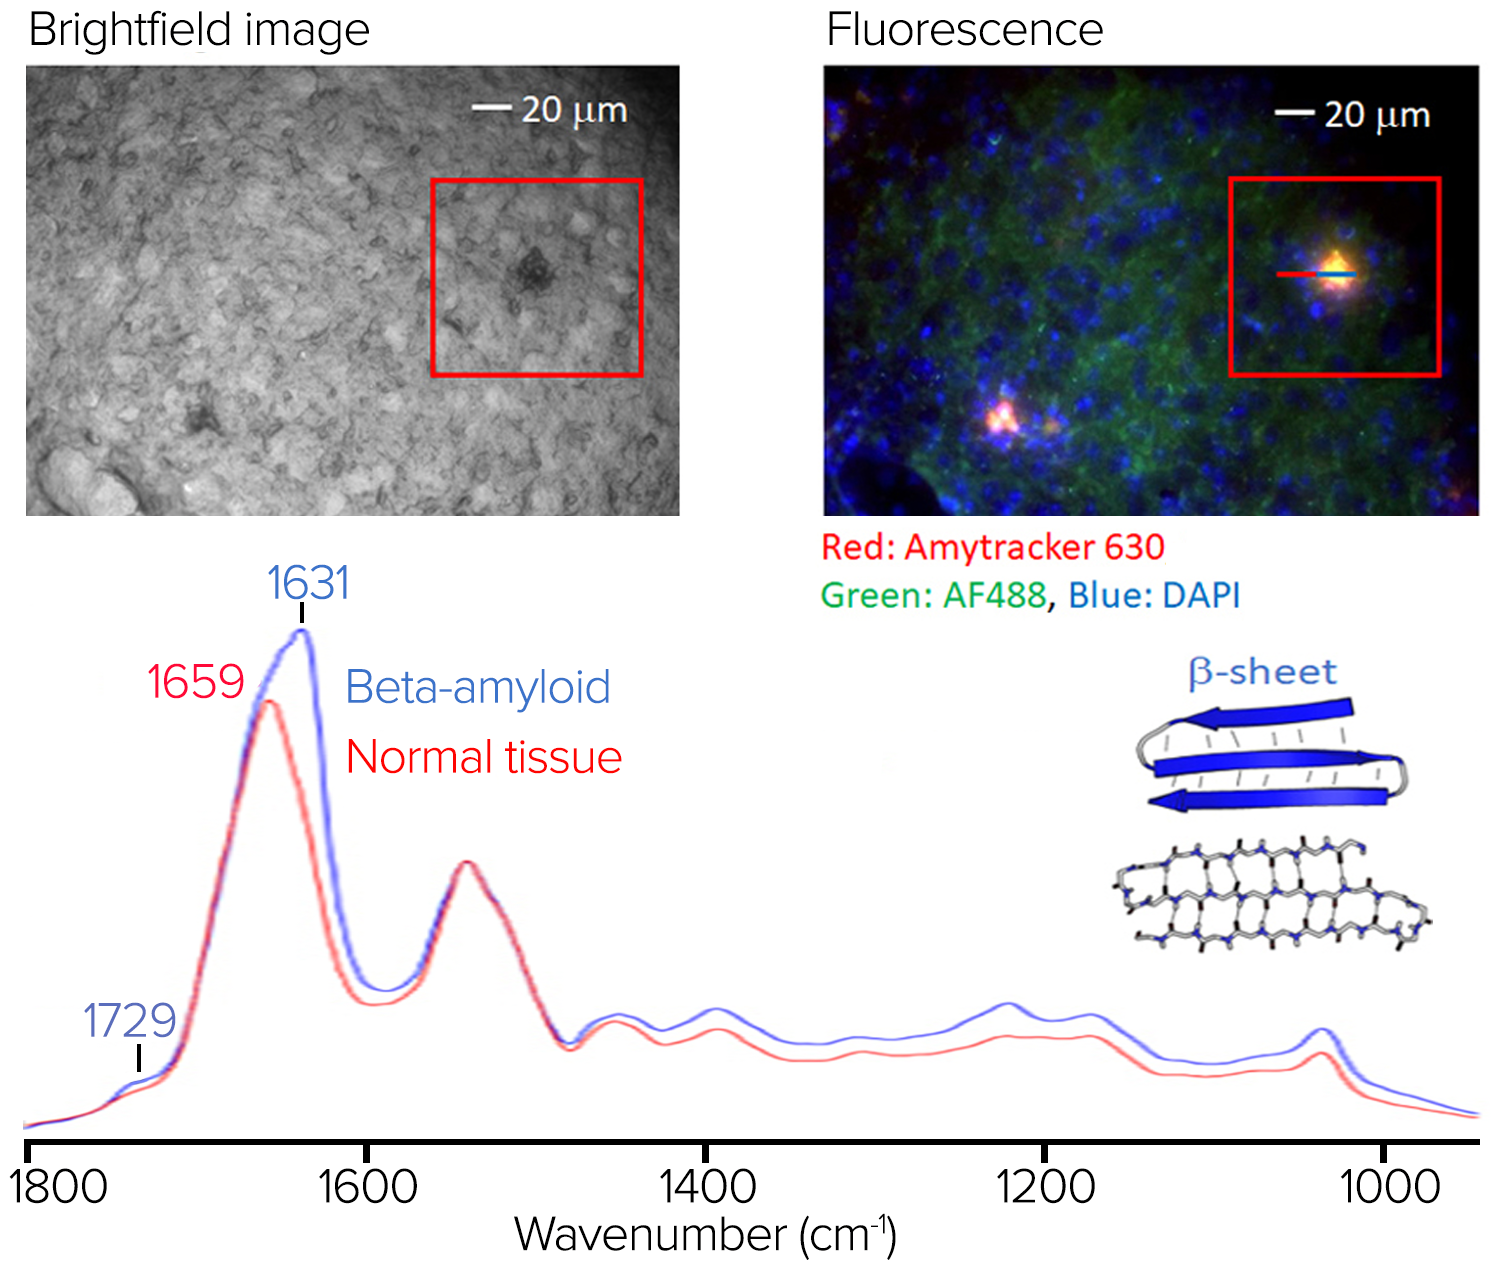 Stained tissue sample with fluorescence image and spectra showing significant spectral differences at 1631cm-1.